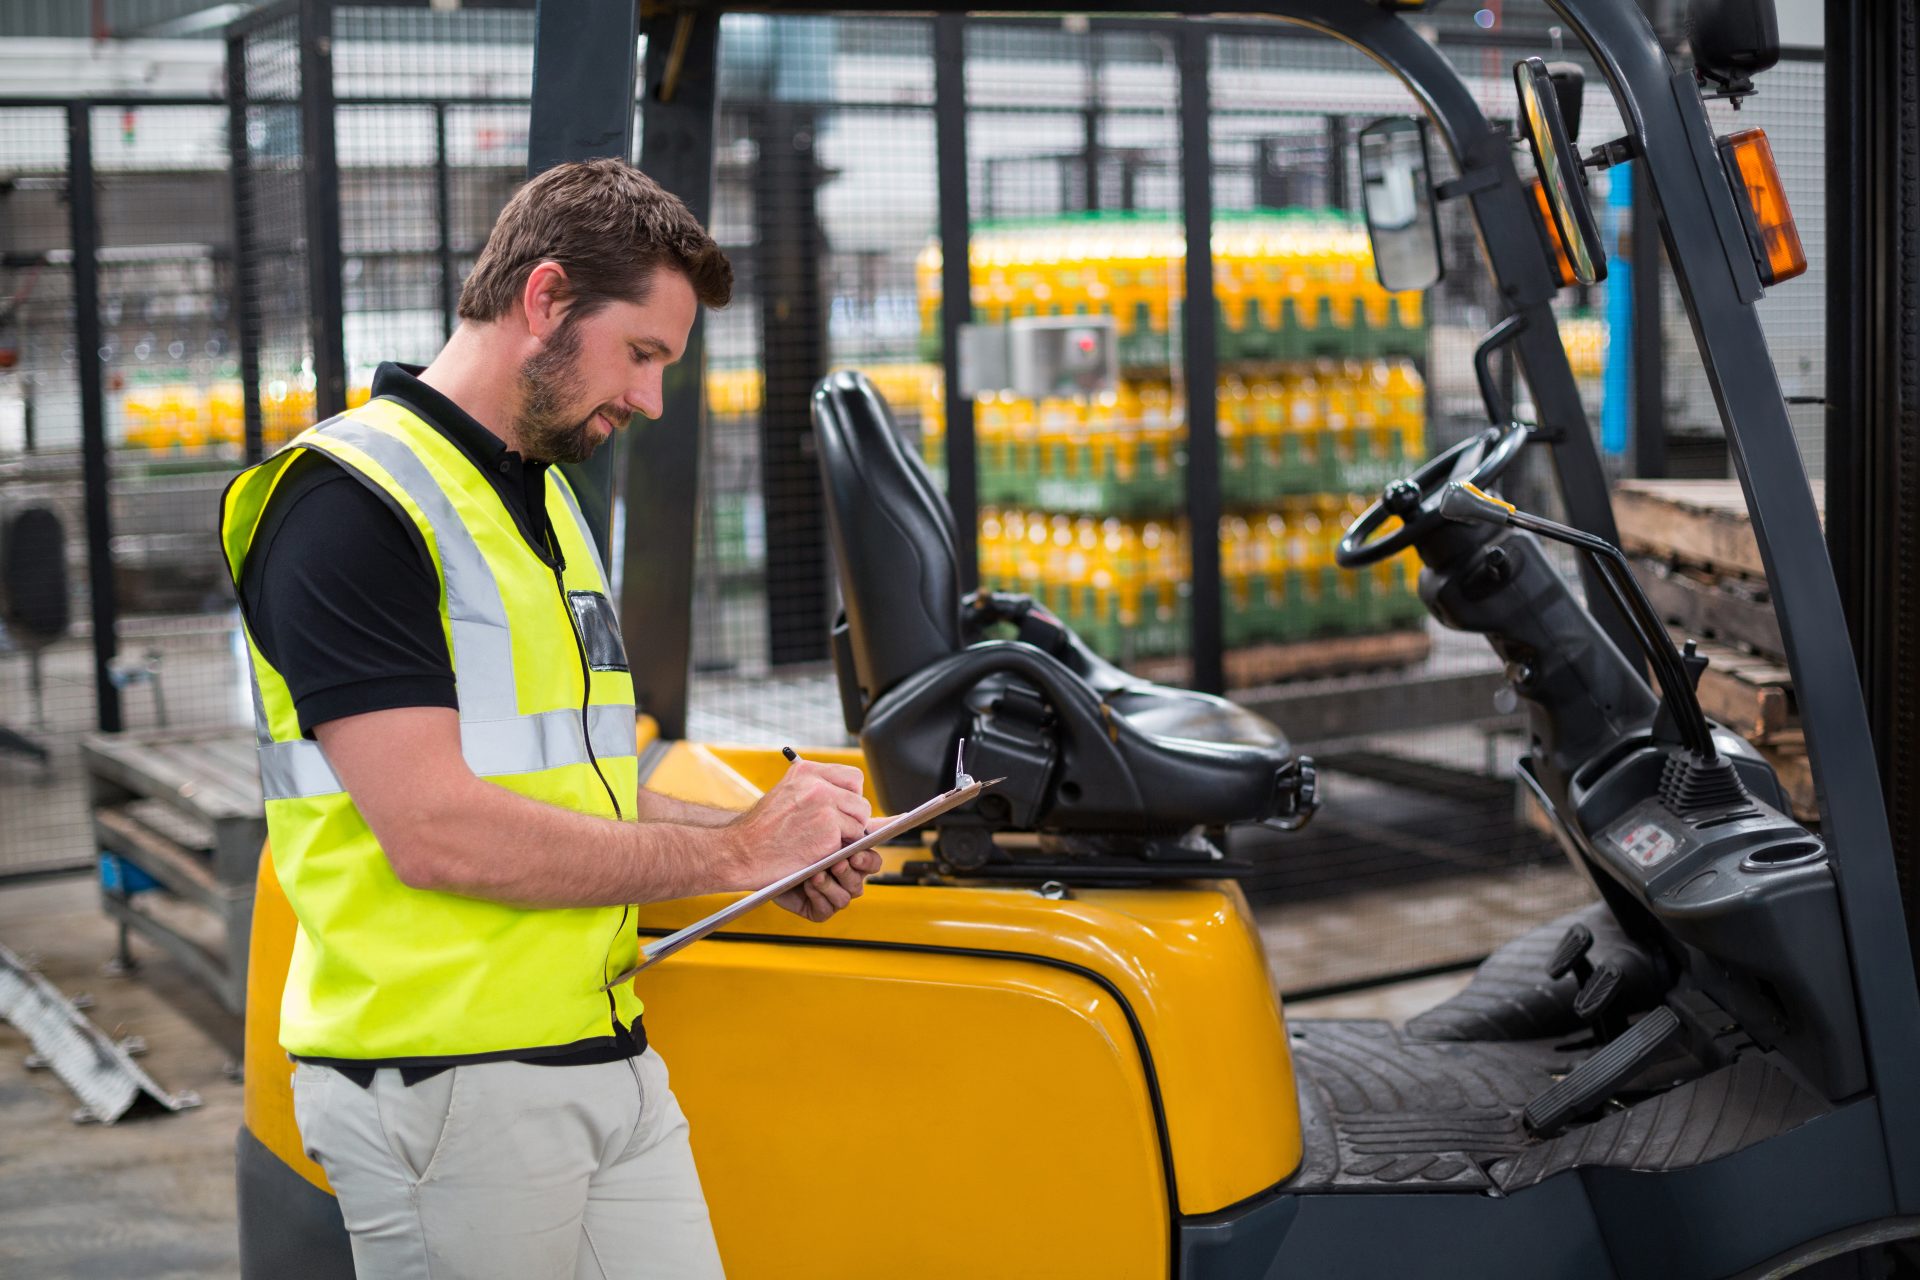 Pre-operational check forklift truck